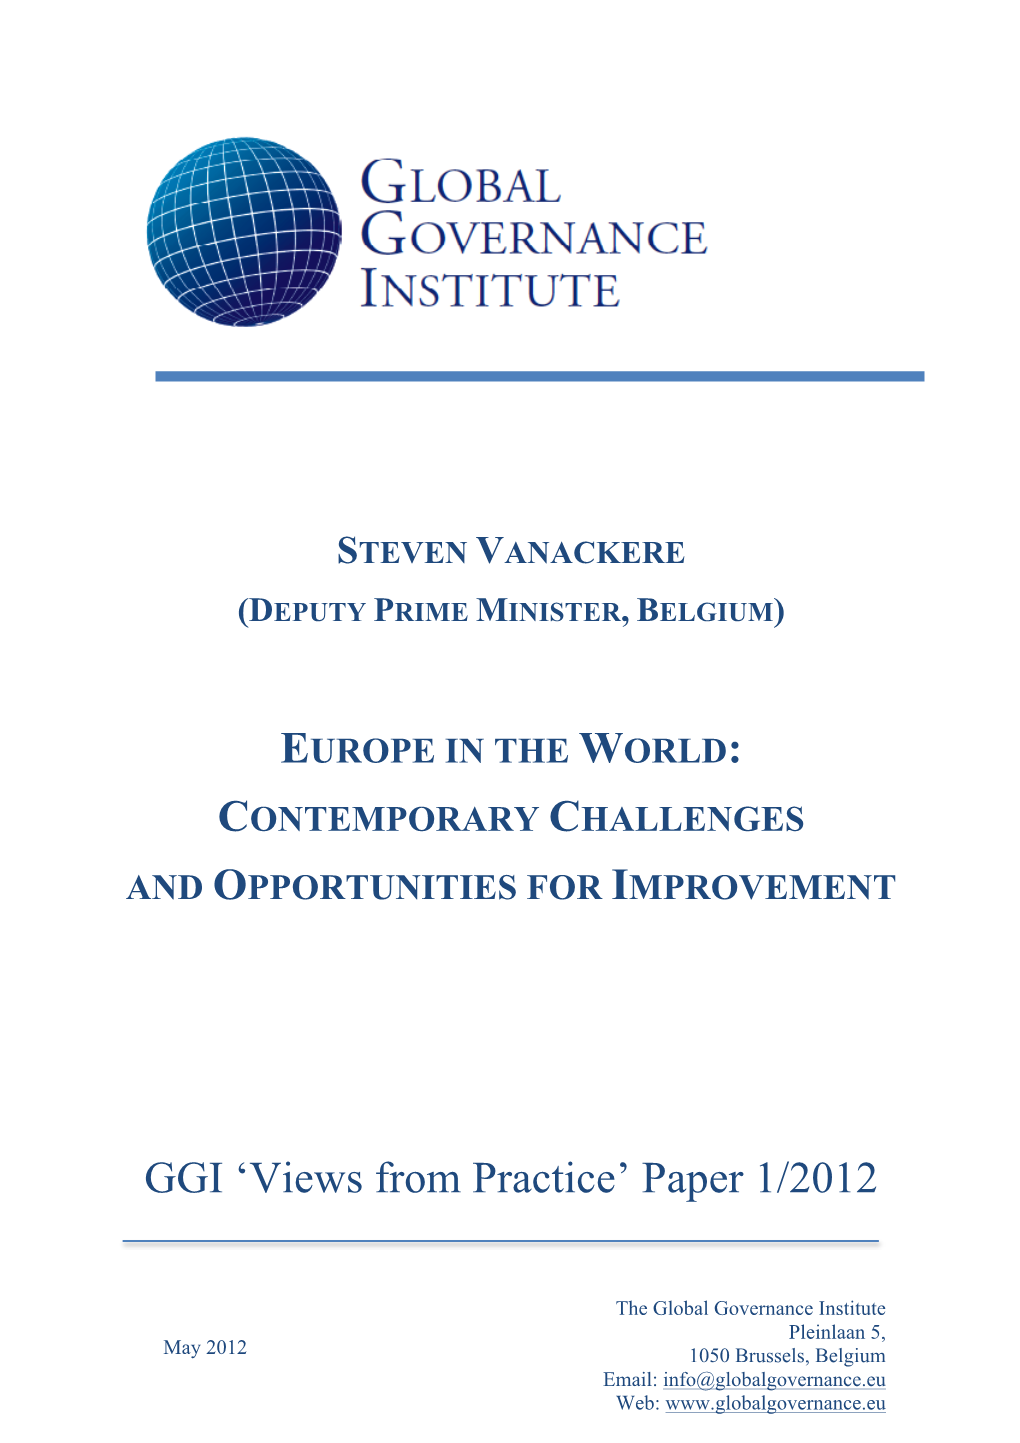 Vanackere, Europe in the World: Contemporary Challenges and Opportunities for Improvement, Global Governance Institute